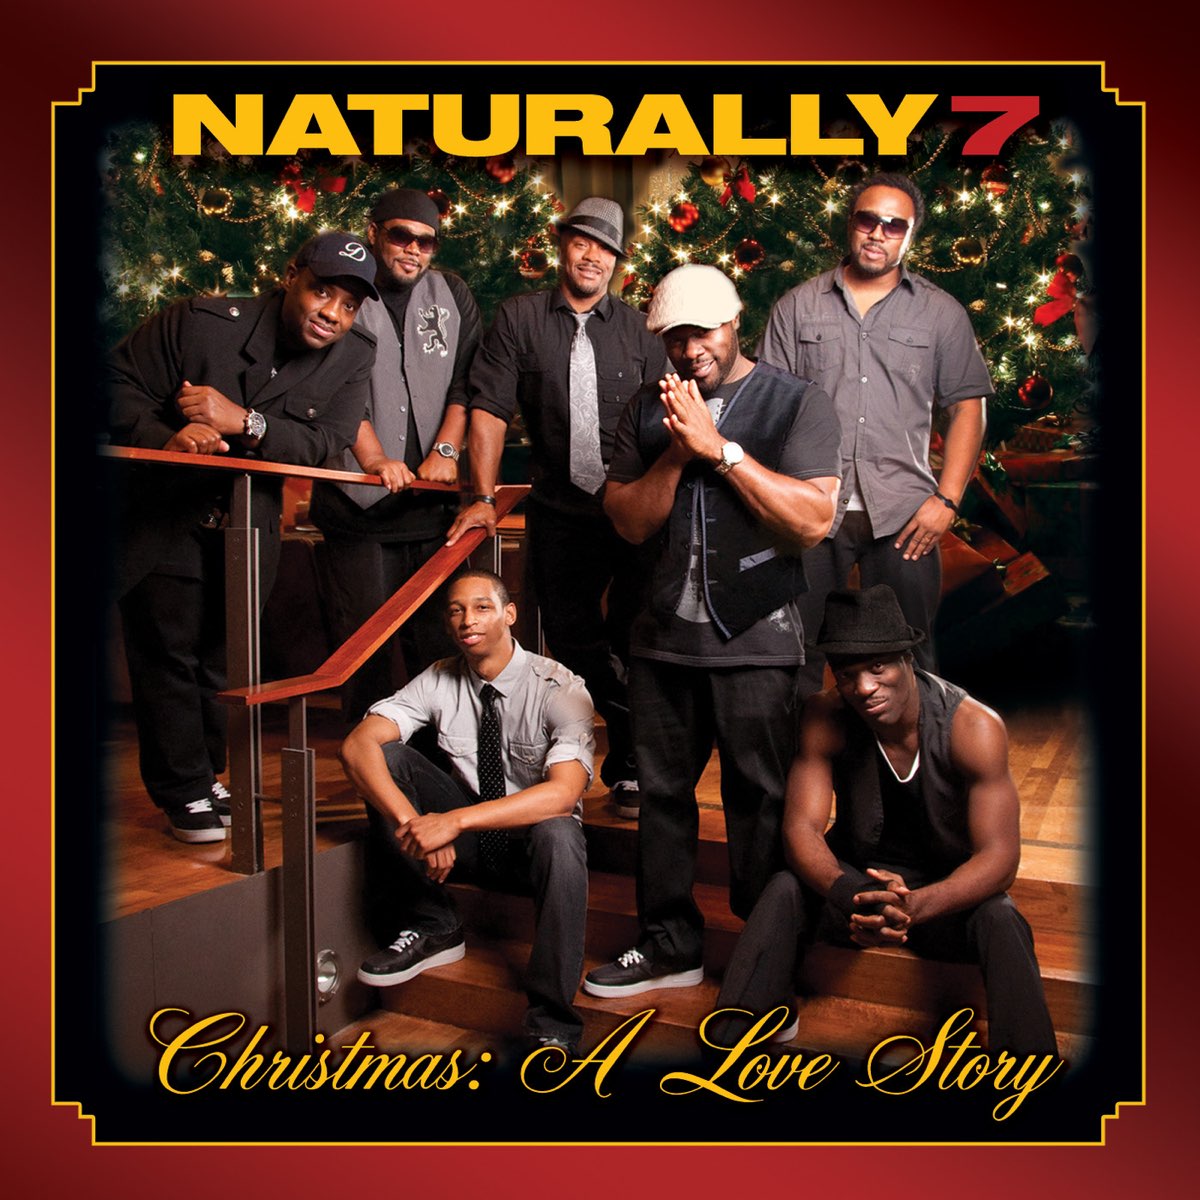 ‎Christmas A Love Story by Naturally 7 on Apple Music